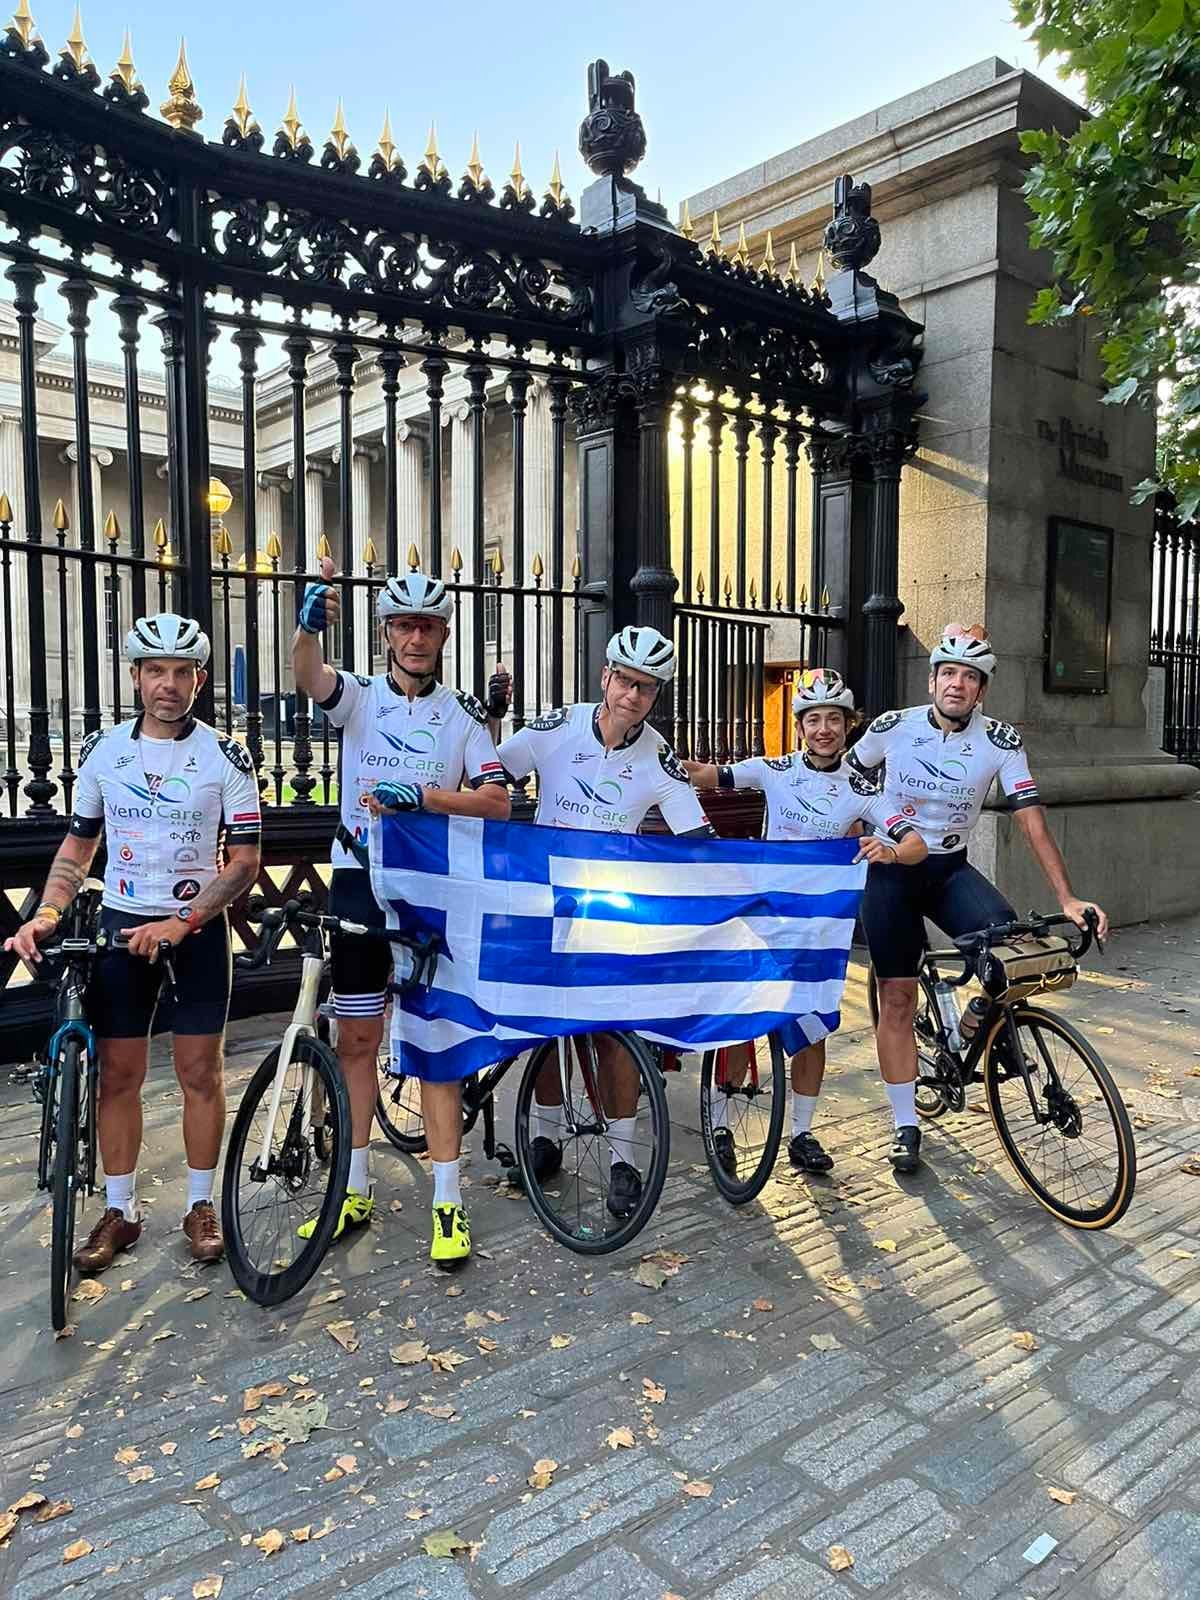 Cycling heroes Λονδίνο-Αθήνα σε 2 Ρόδες, London Athens on two wheels, present plaques to the Melina Mercouri Foundation and the Acropolis Museum